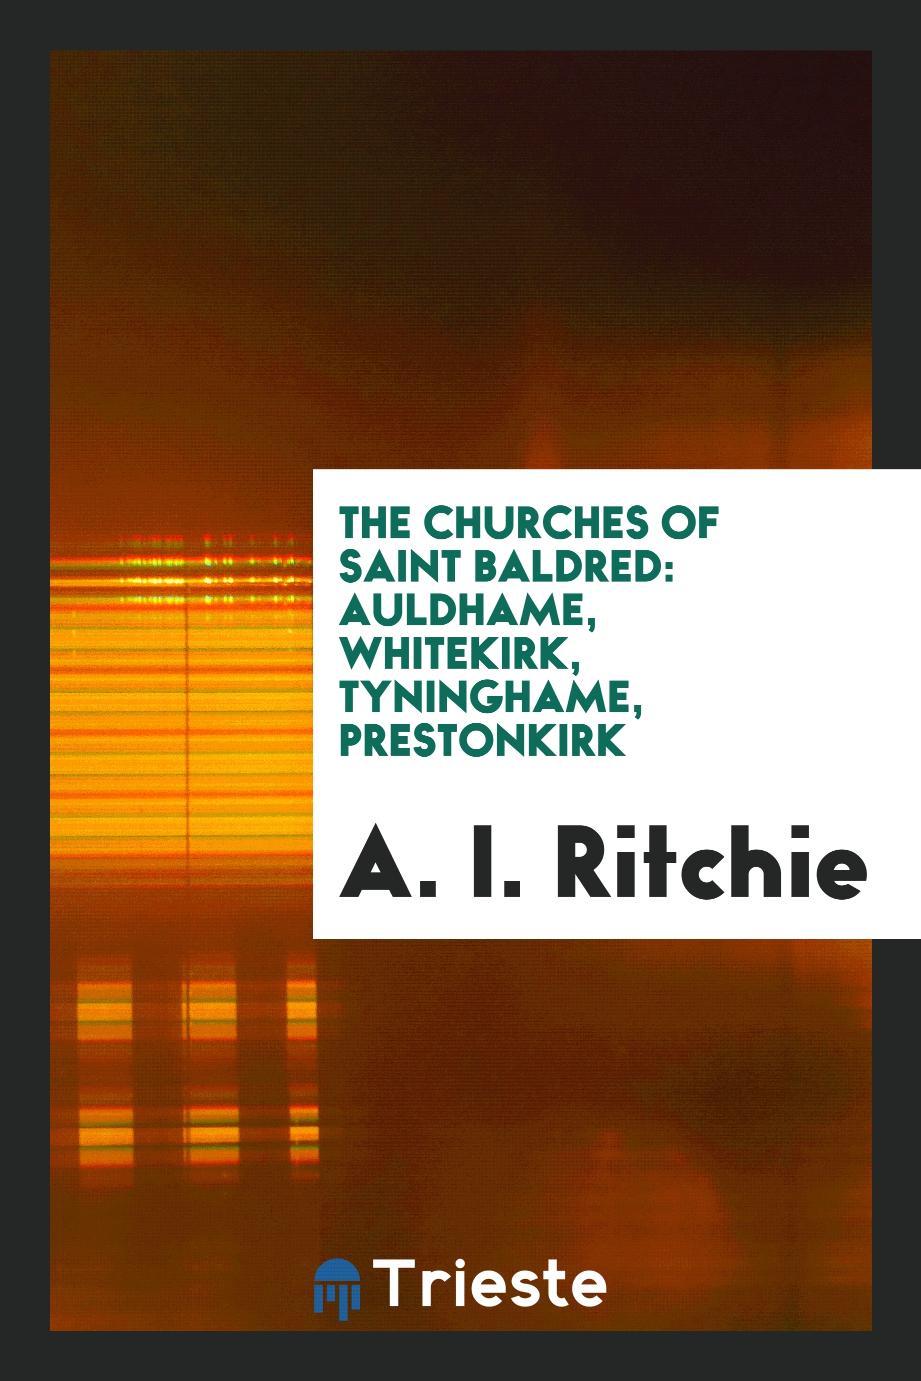 A. I. Ritchie - The Churches of Saint Baldred: Auldhame, Whitekirk, Tyninghame, Prestonkirk